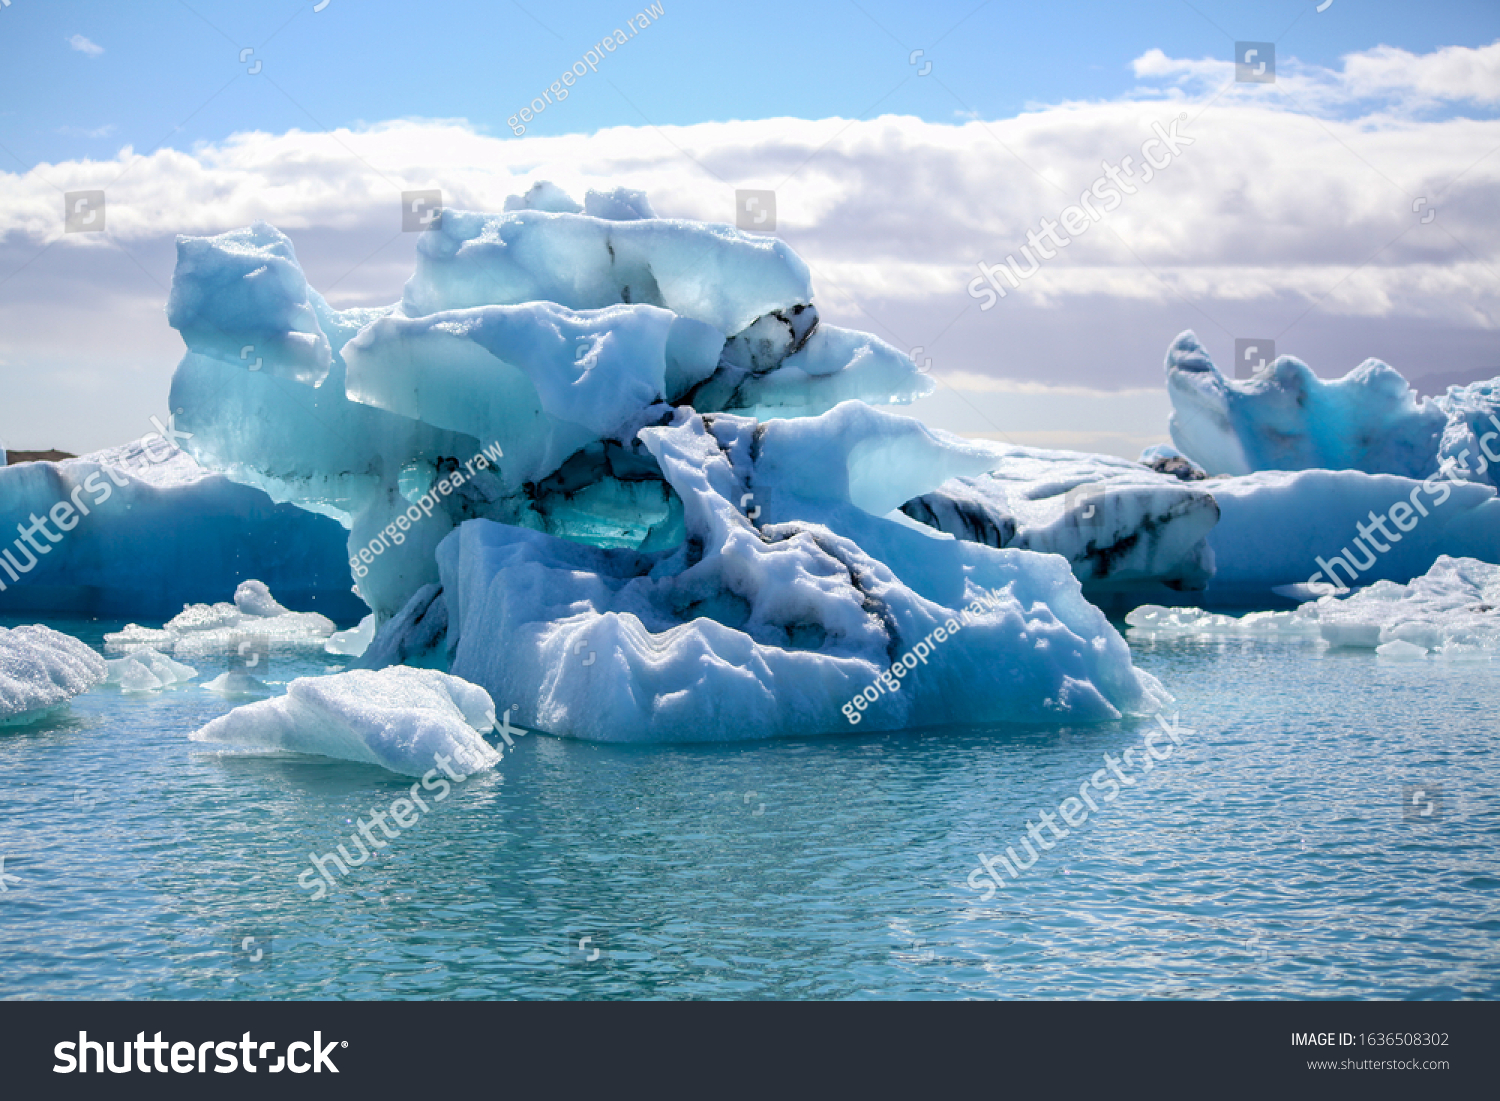 41,220 Ice age Images, Stock Photos & Vectors | Shutterstock